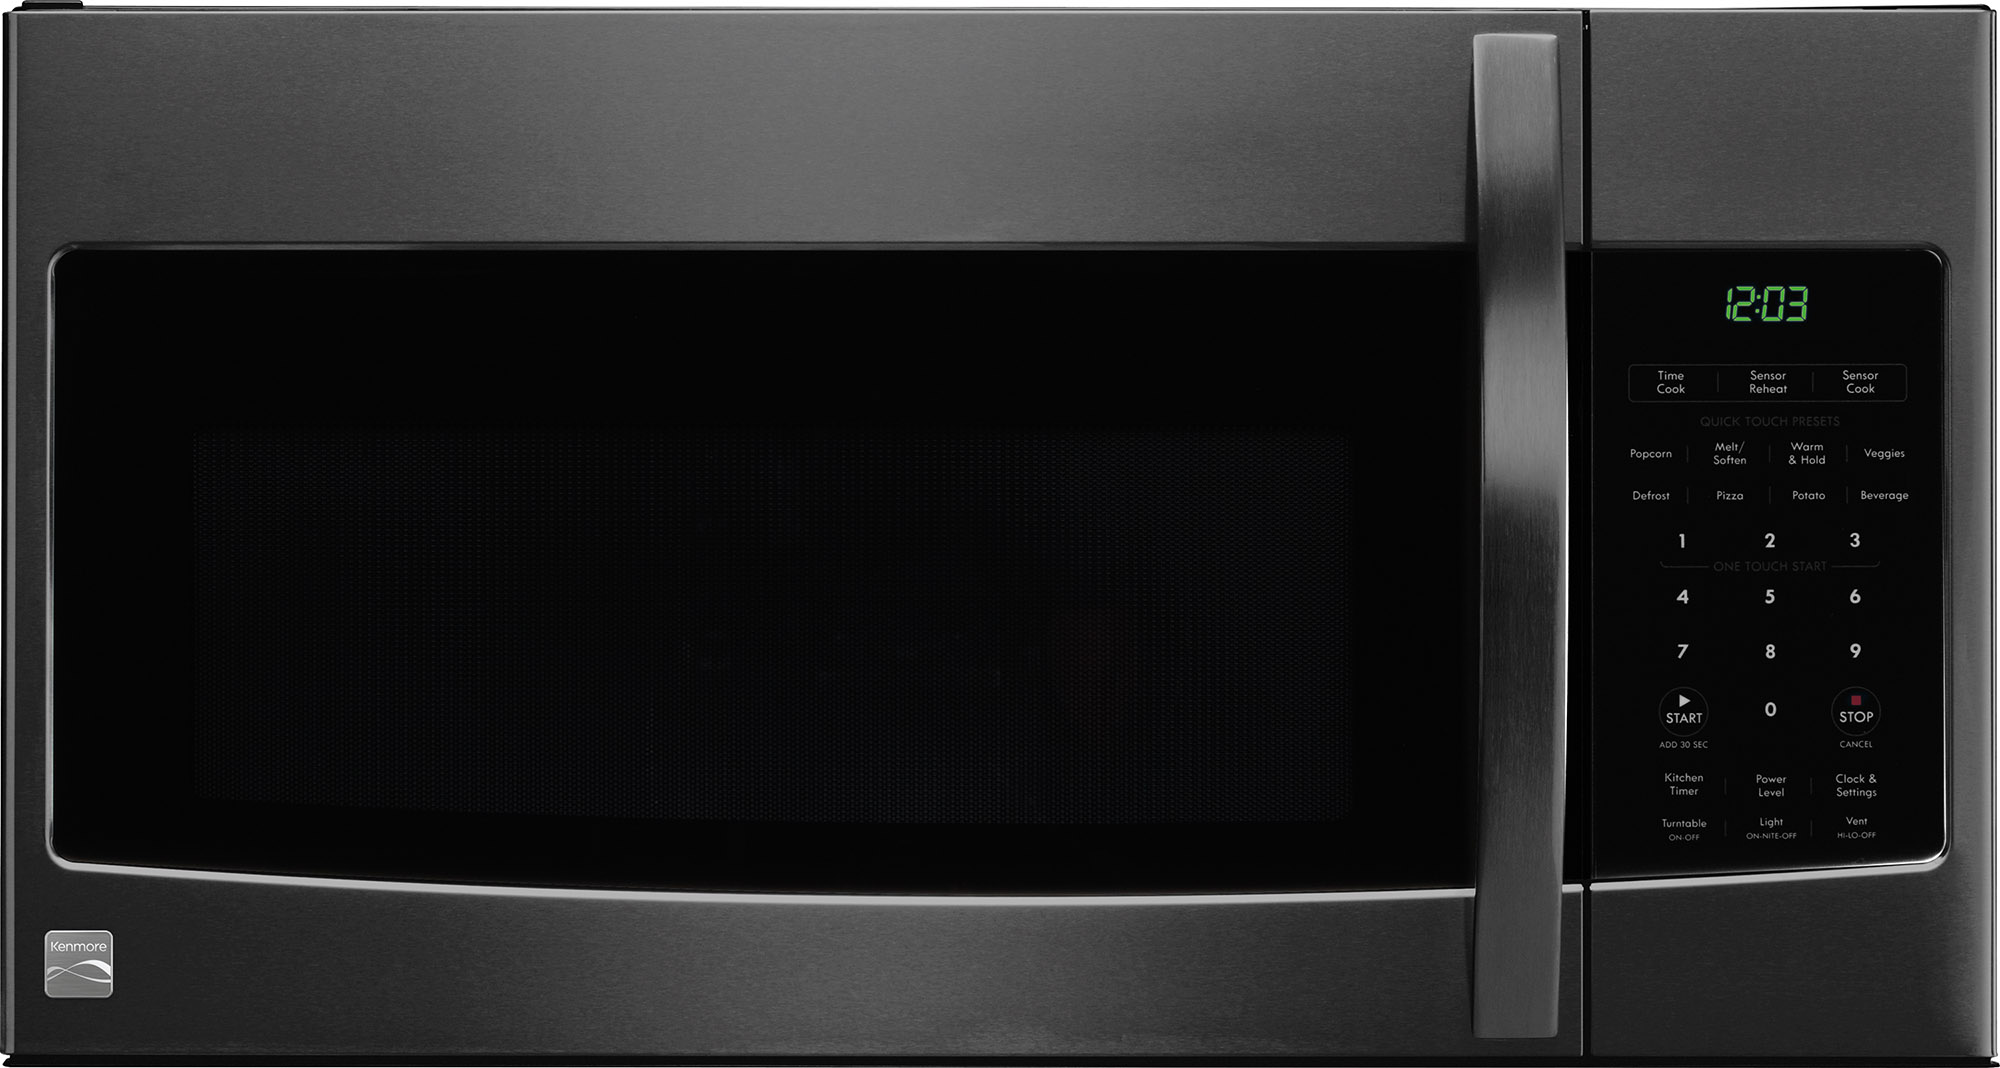 Kenmore 83337 1.7 cu. ft. Over-the-Range Microwave - Black Stainless Steel